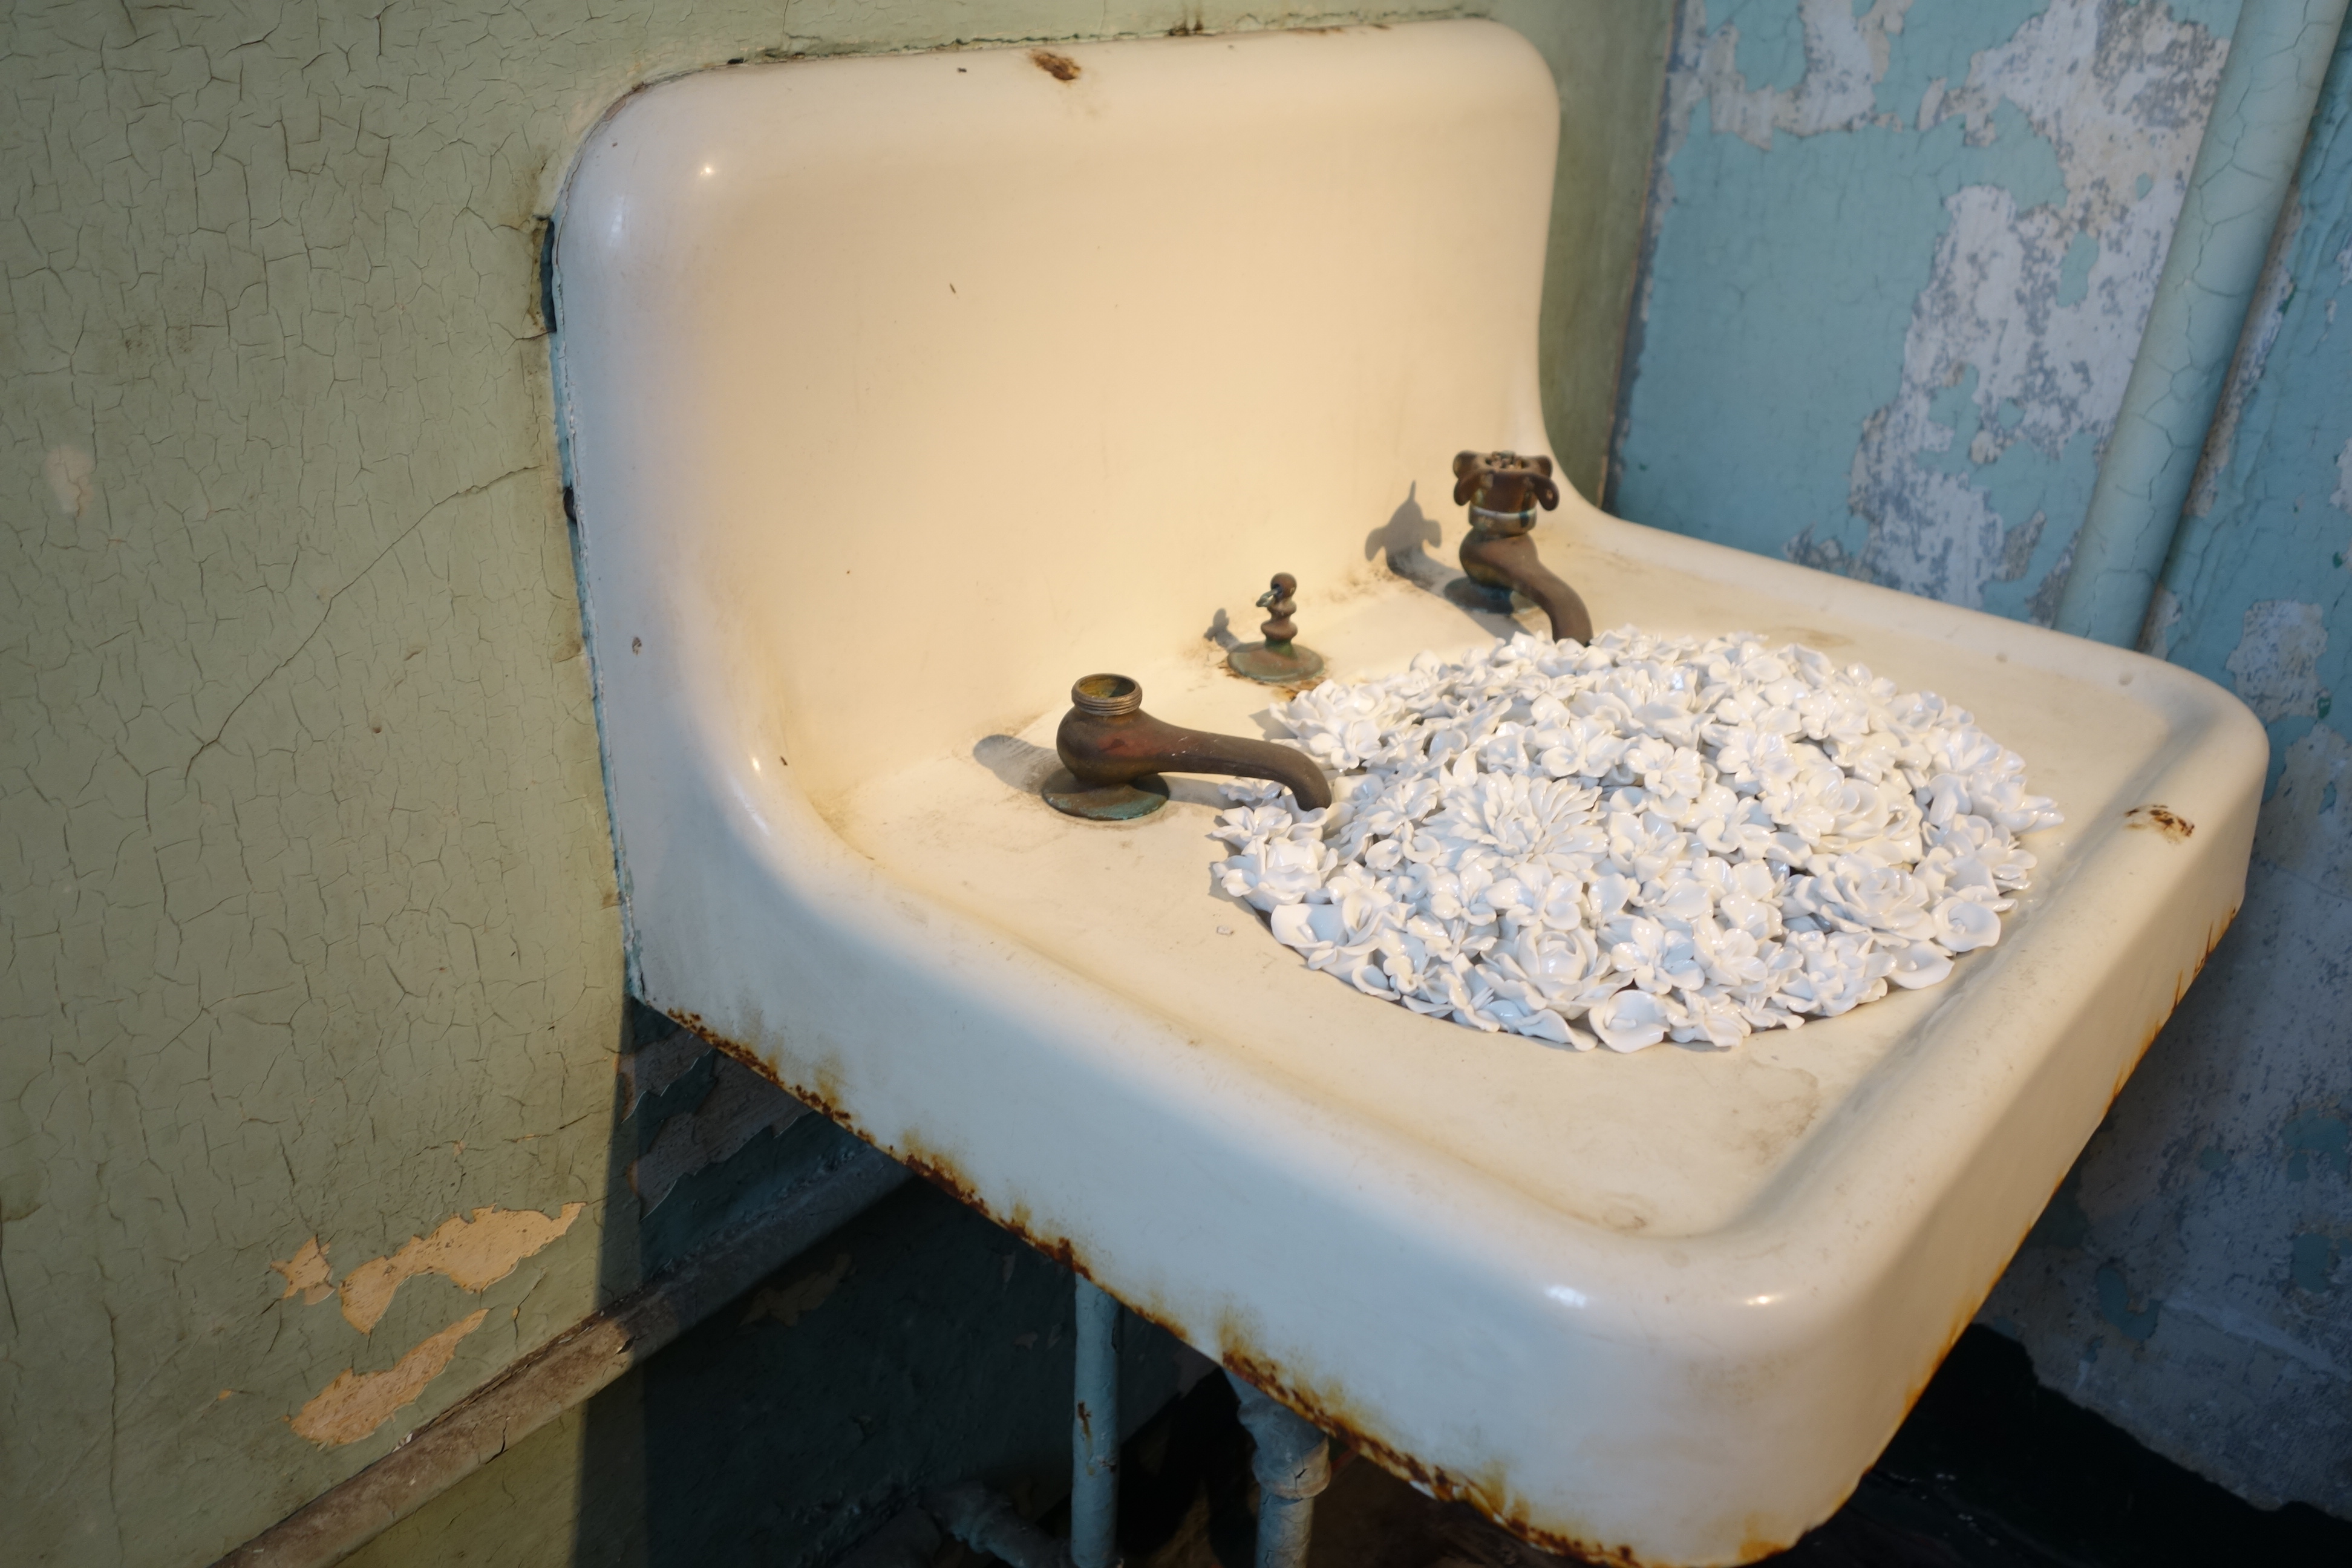 In "Blossom," Weiwei fills hospital wing amenities like sinks and bathtubs with intricate porcelain flower sculptures, pictured on Sept. 24, 2014. (Katy Steinmetz for TIME)